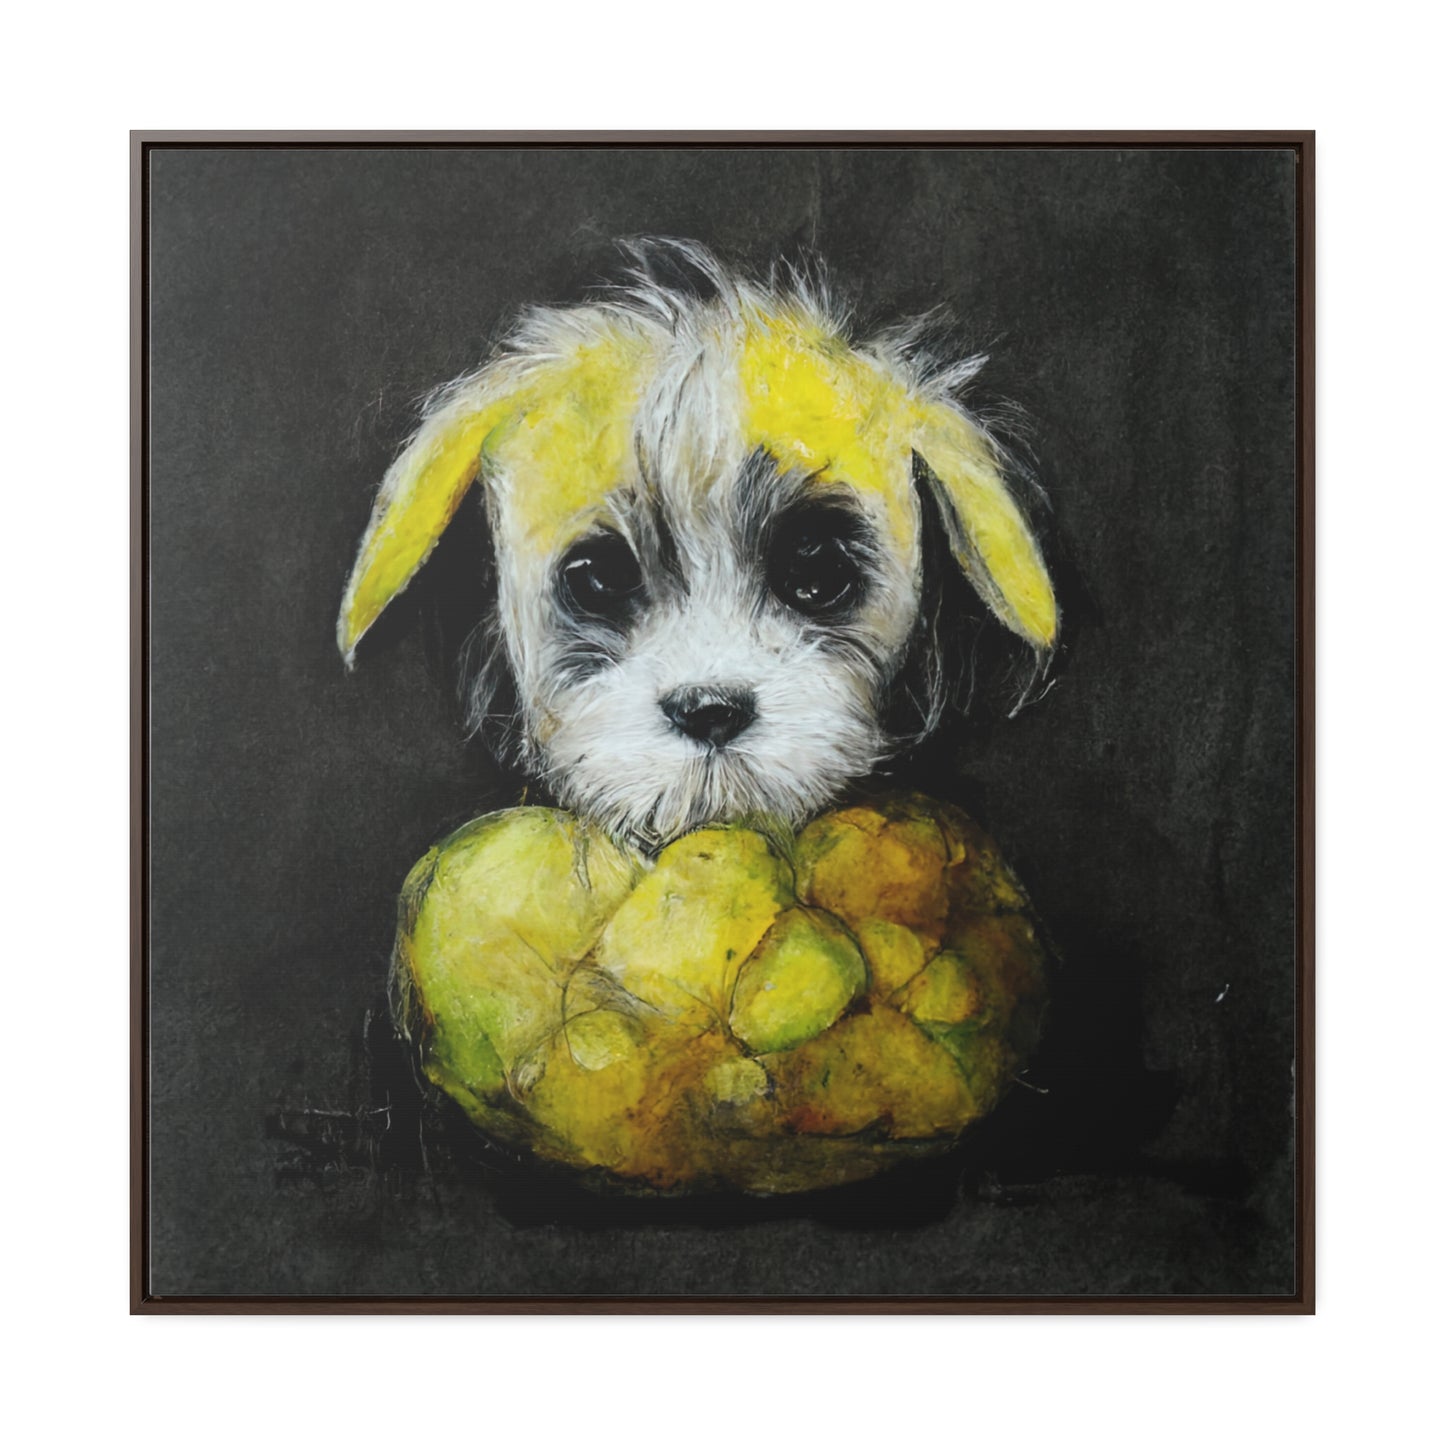 Dogs and Puppies, Valentinii, Gallery Canvas Wraps, Square Frame